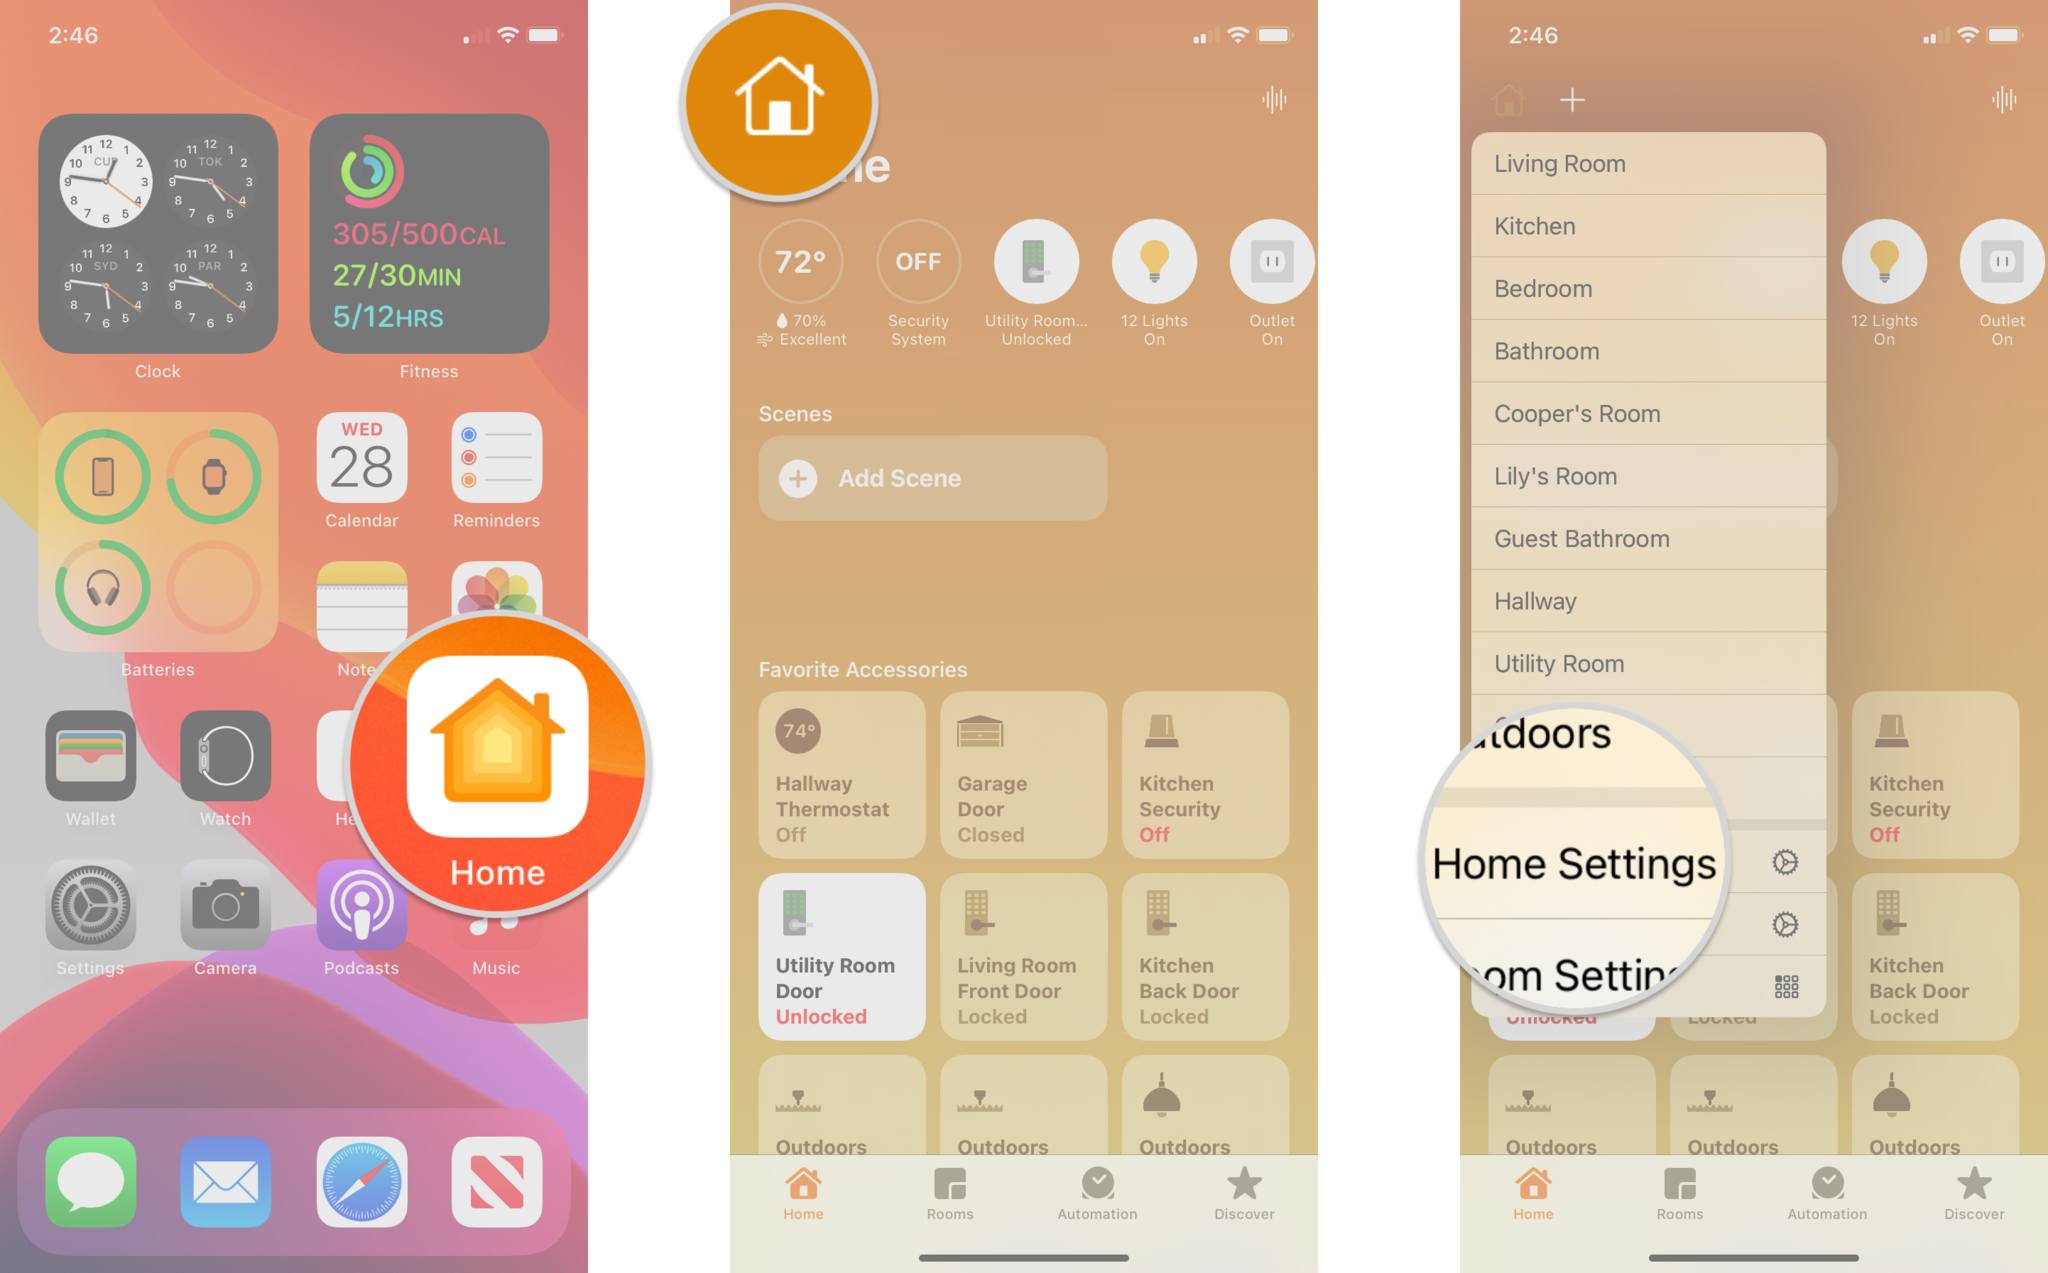 How to set Network Security restrictions in the Home app by showing steps on an iPhone: Launch the Home app, Tap on the Home icon, Tap Home Settings